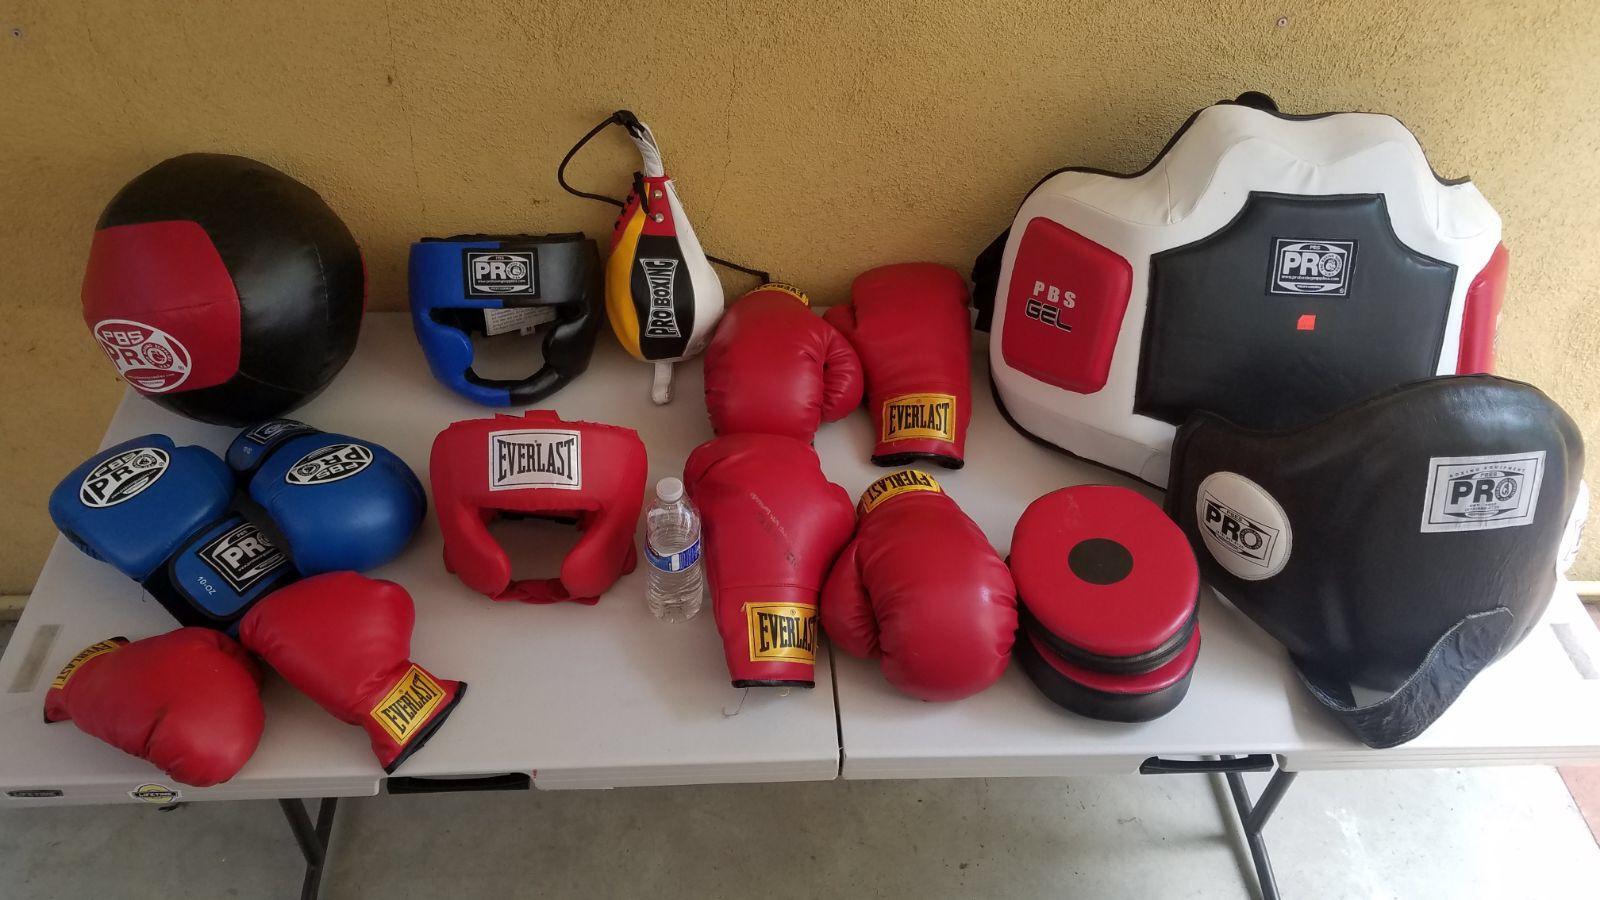 Boxing equipment, everlast and pro